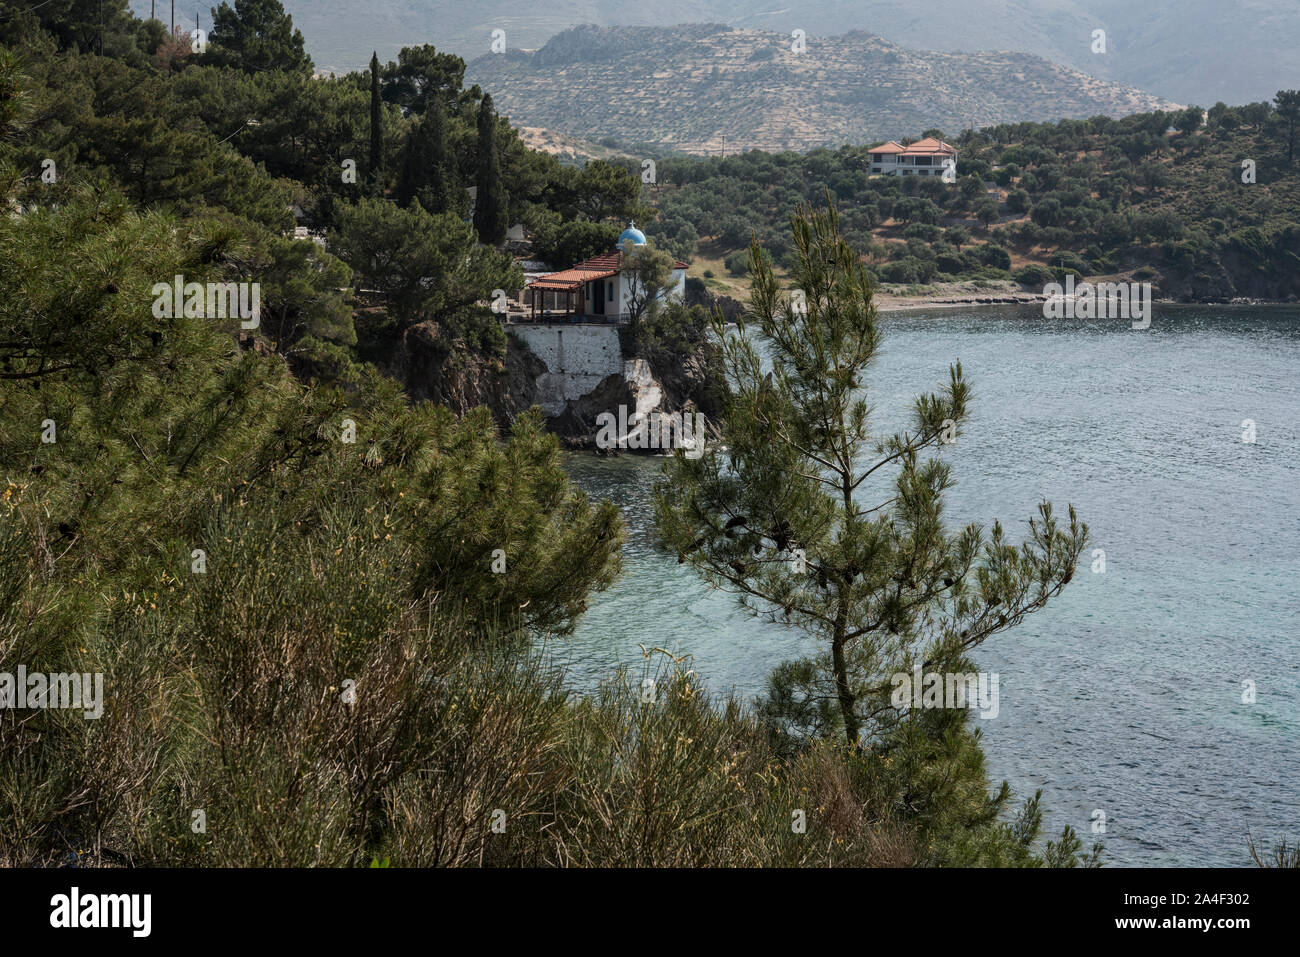 The beach and Church at Par Ermogenis, Lesbos, Greece. Stock Photo